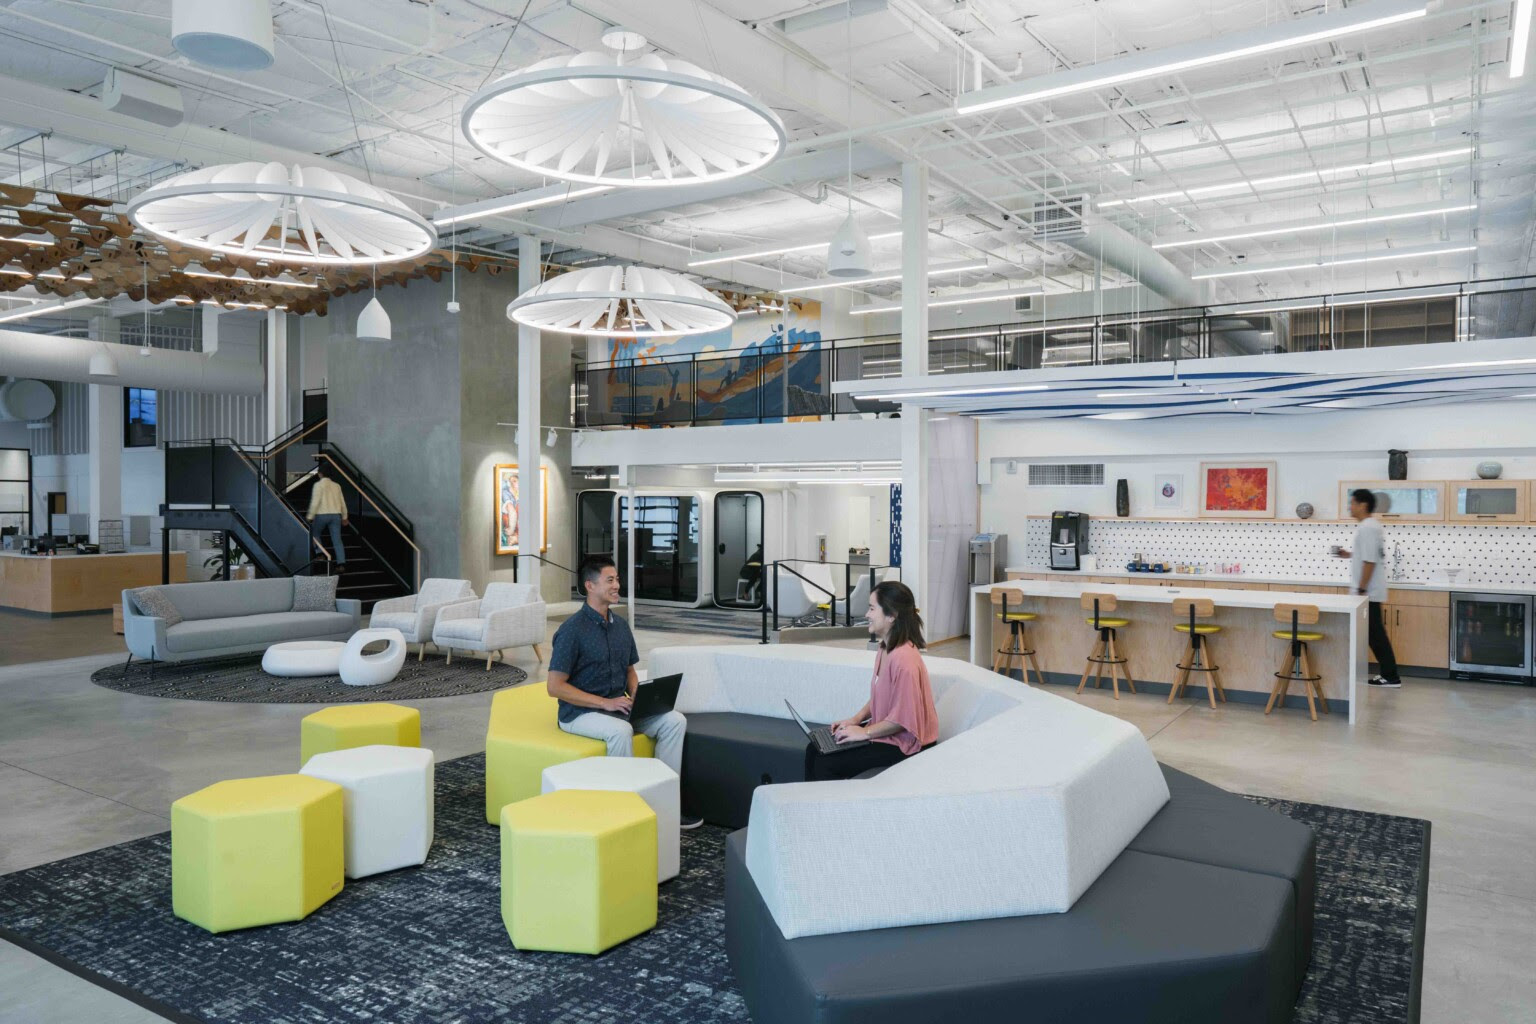 Servco Pacific highlights its musical instruments and automobile divisions with guitar accents on the ceiling and an antique car on the floor. | Photo: courtesy of Servco Pacific